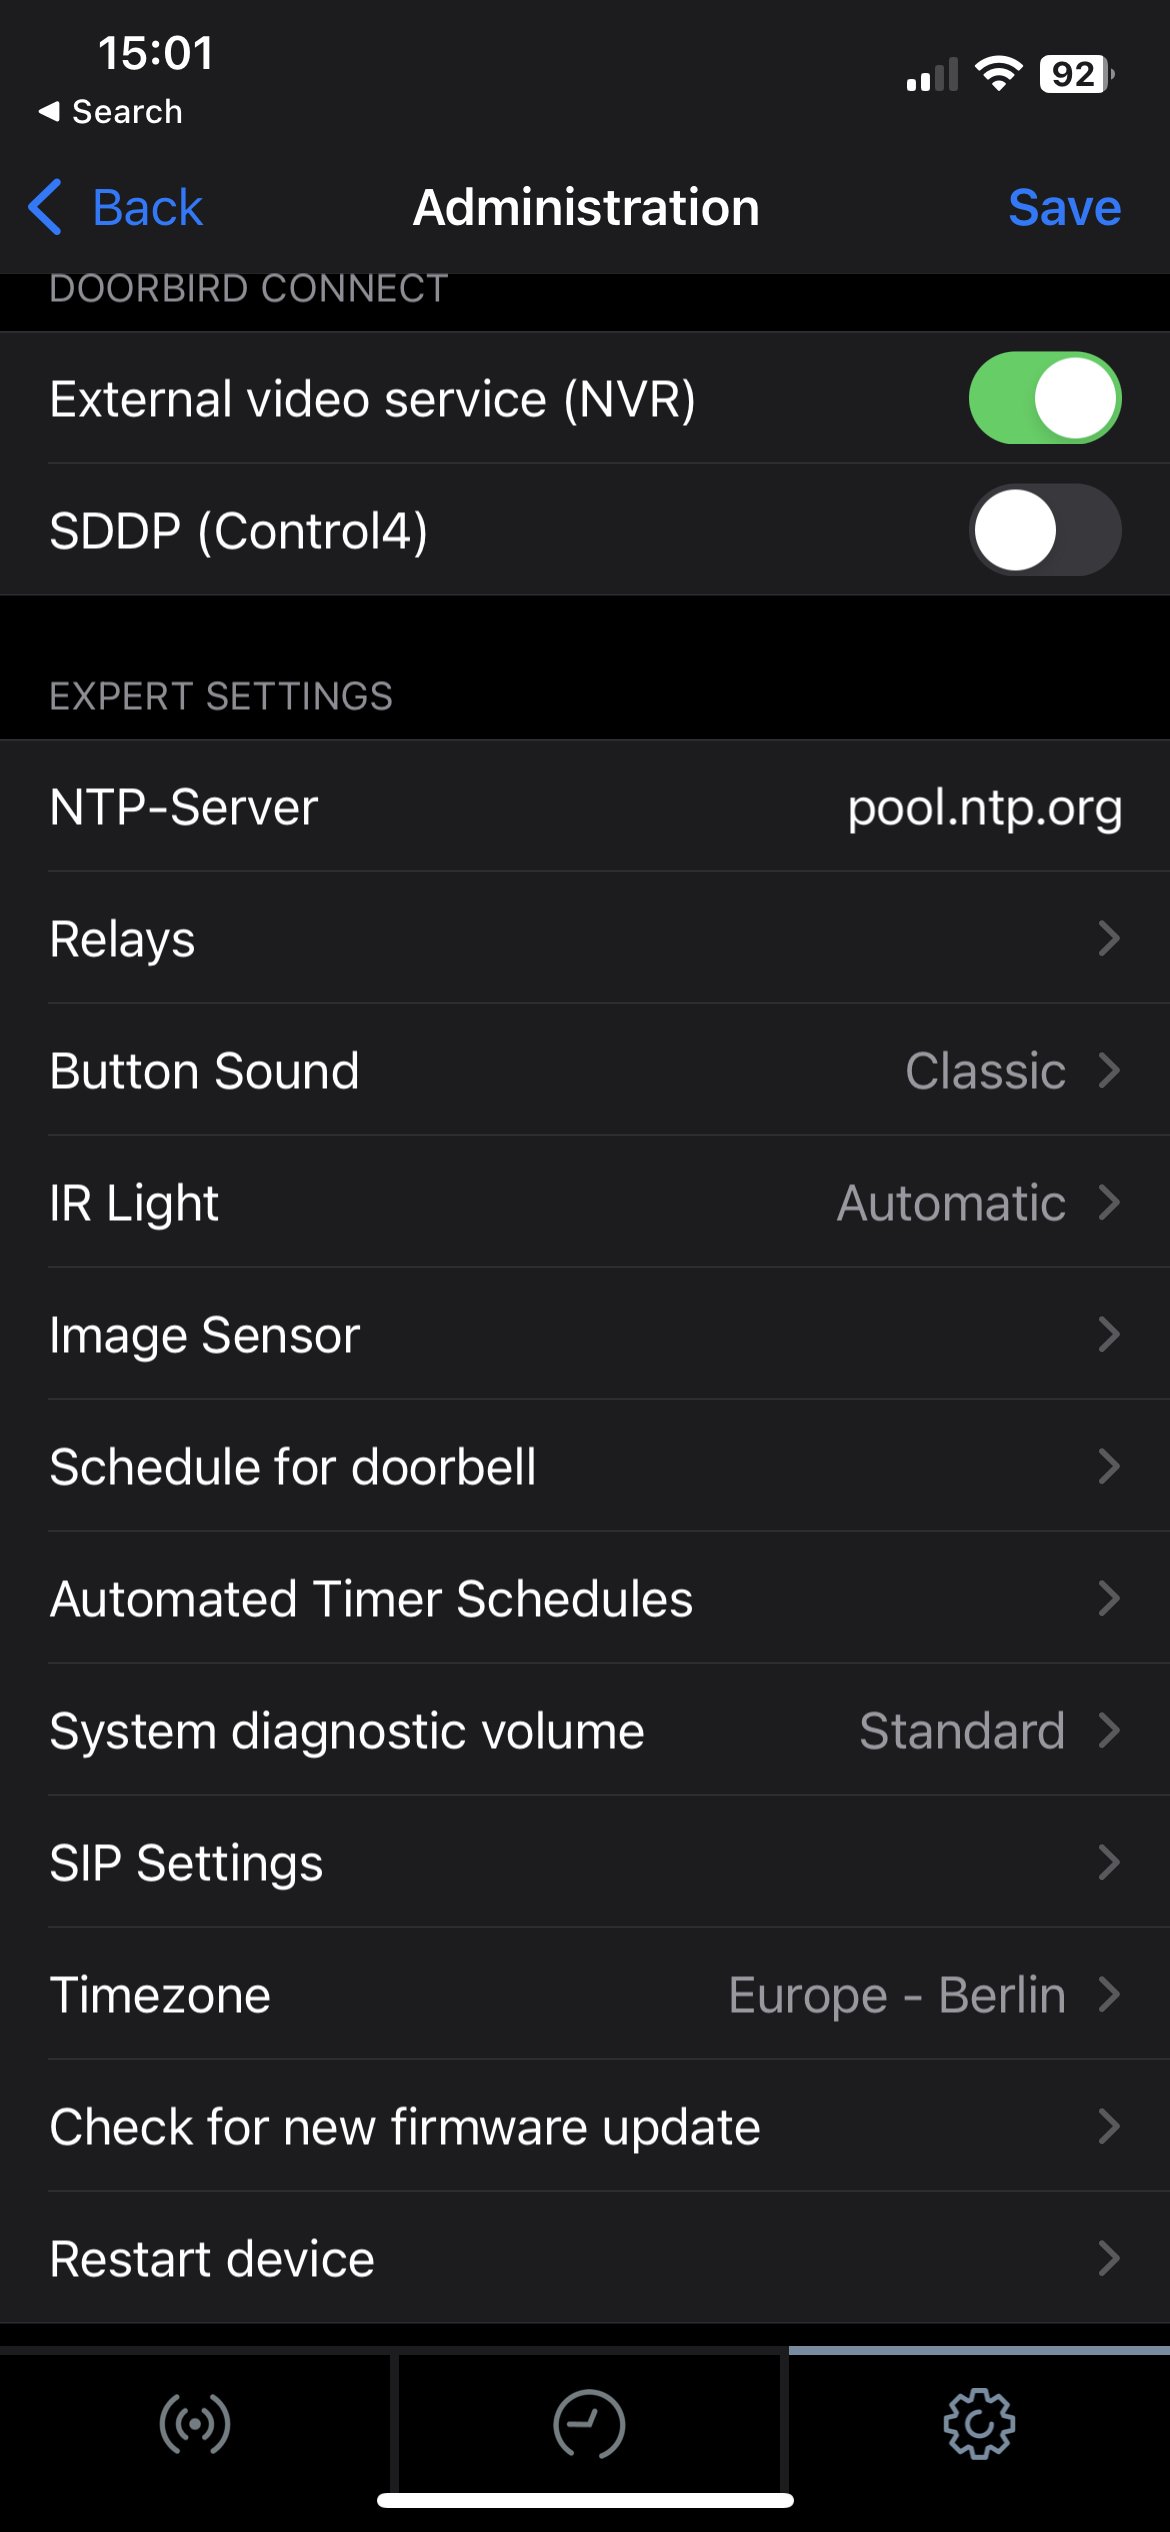 Find "Schedule for doorbell" in the settings